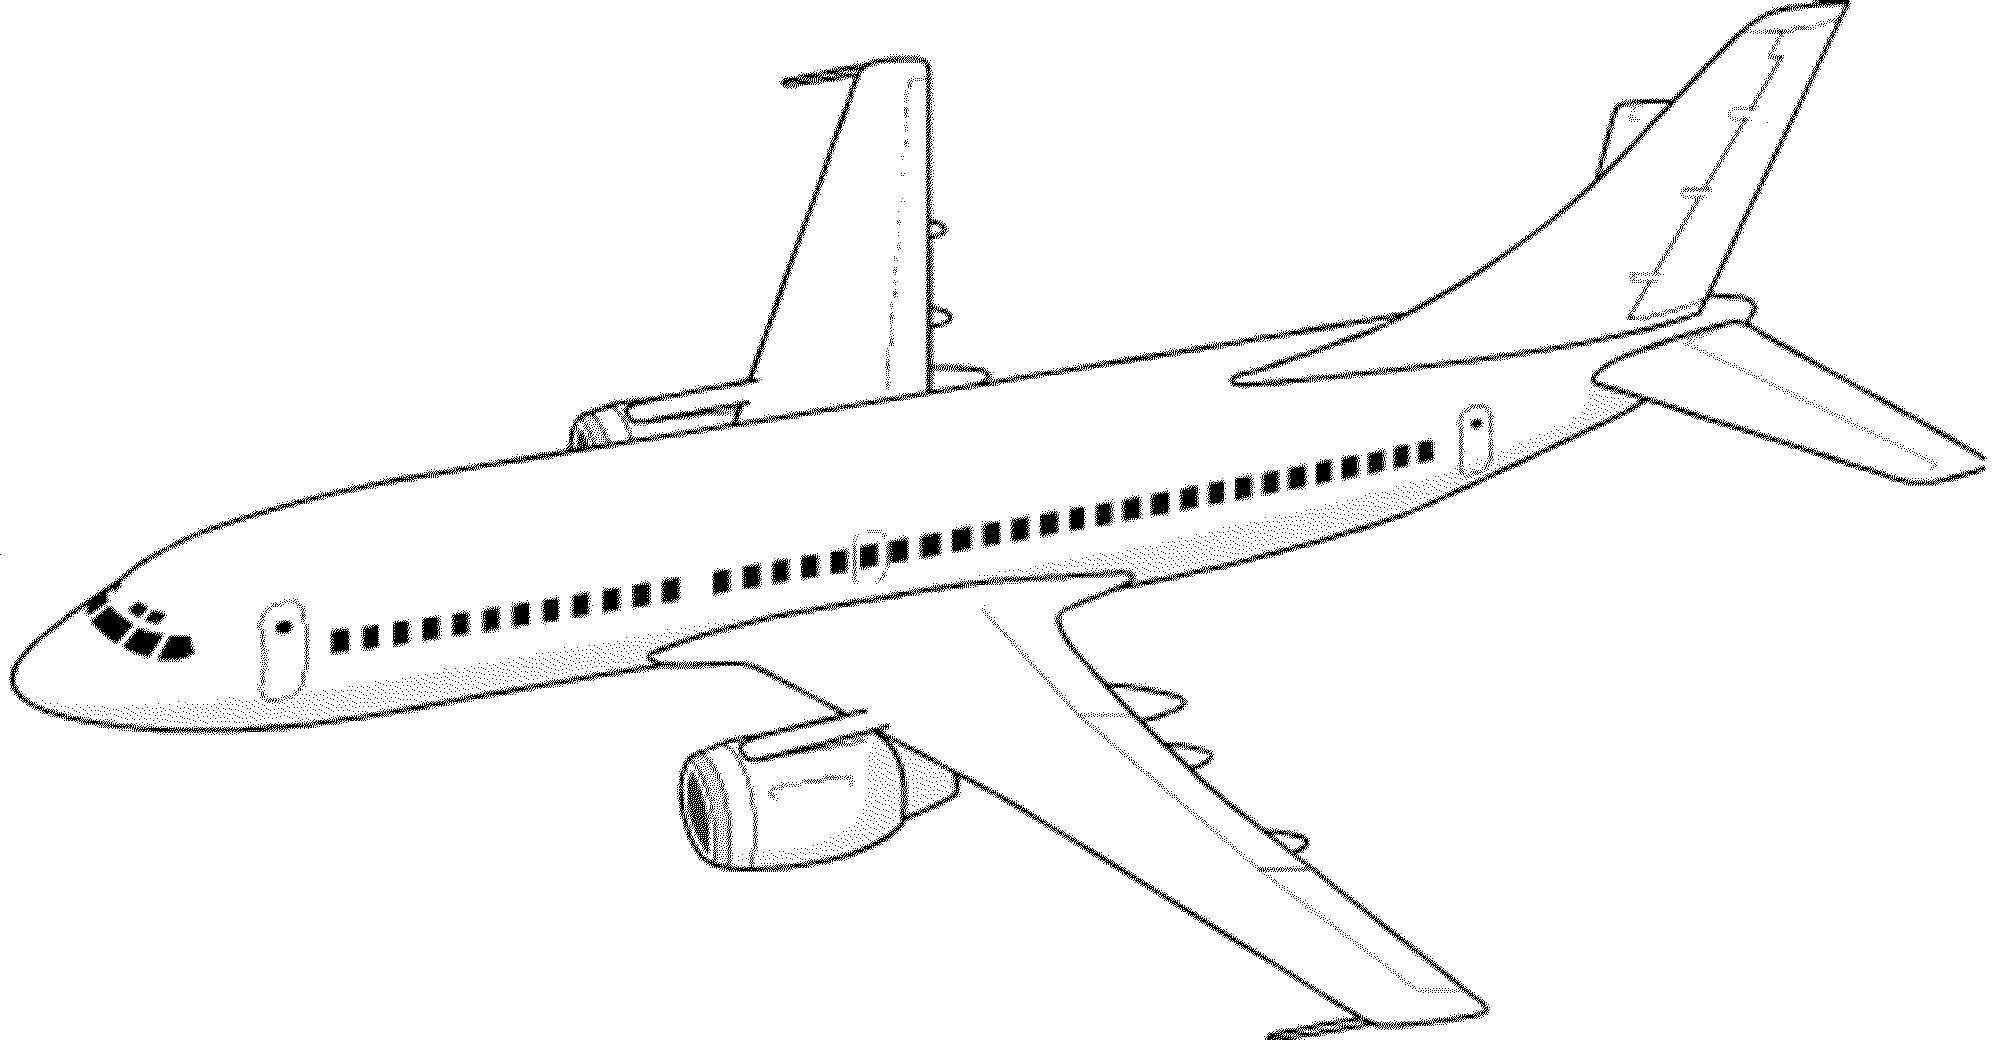 Free Aeroplanes Coloring Pages, Download Free Aeroplanes Coloring Pages